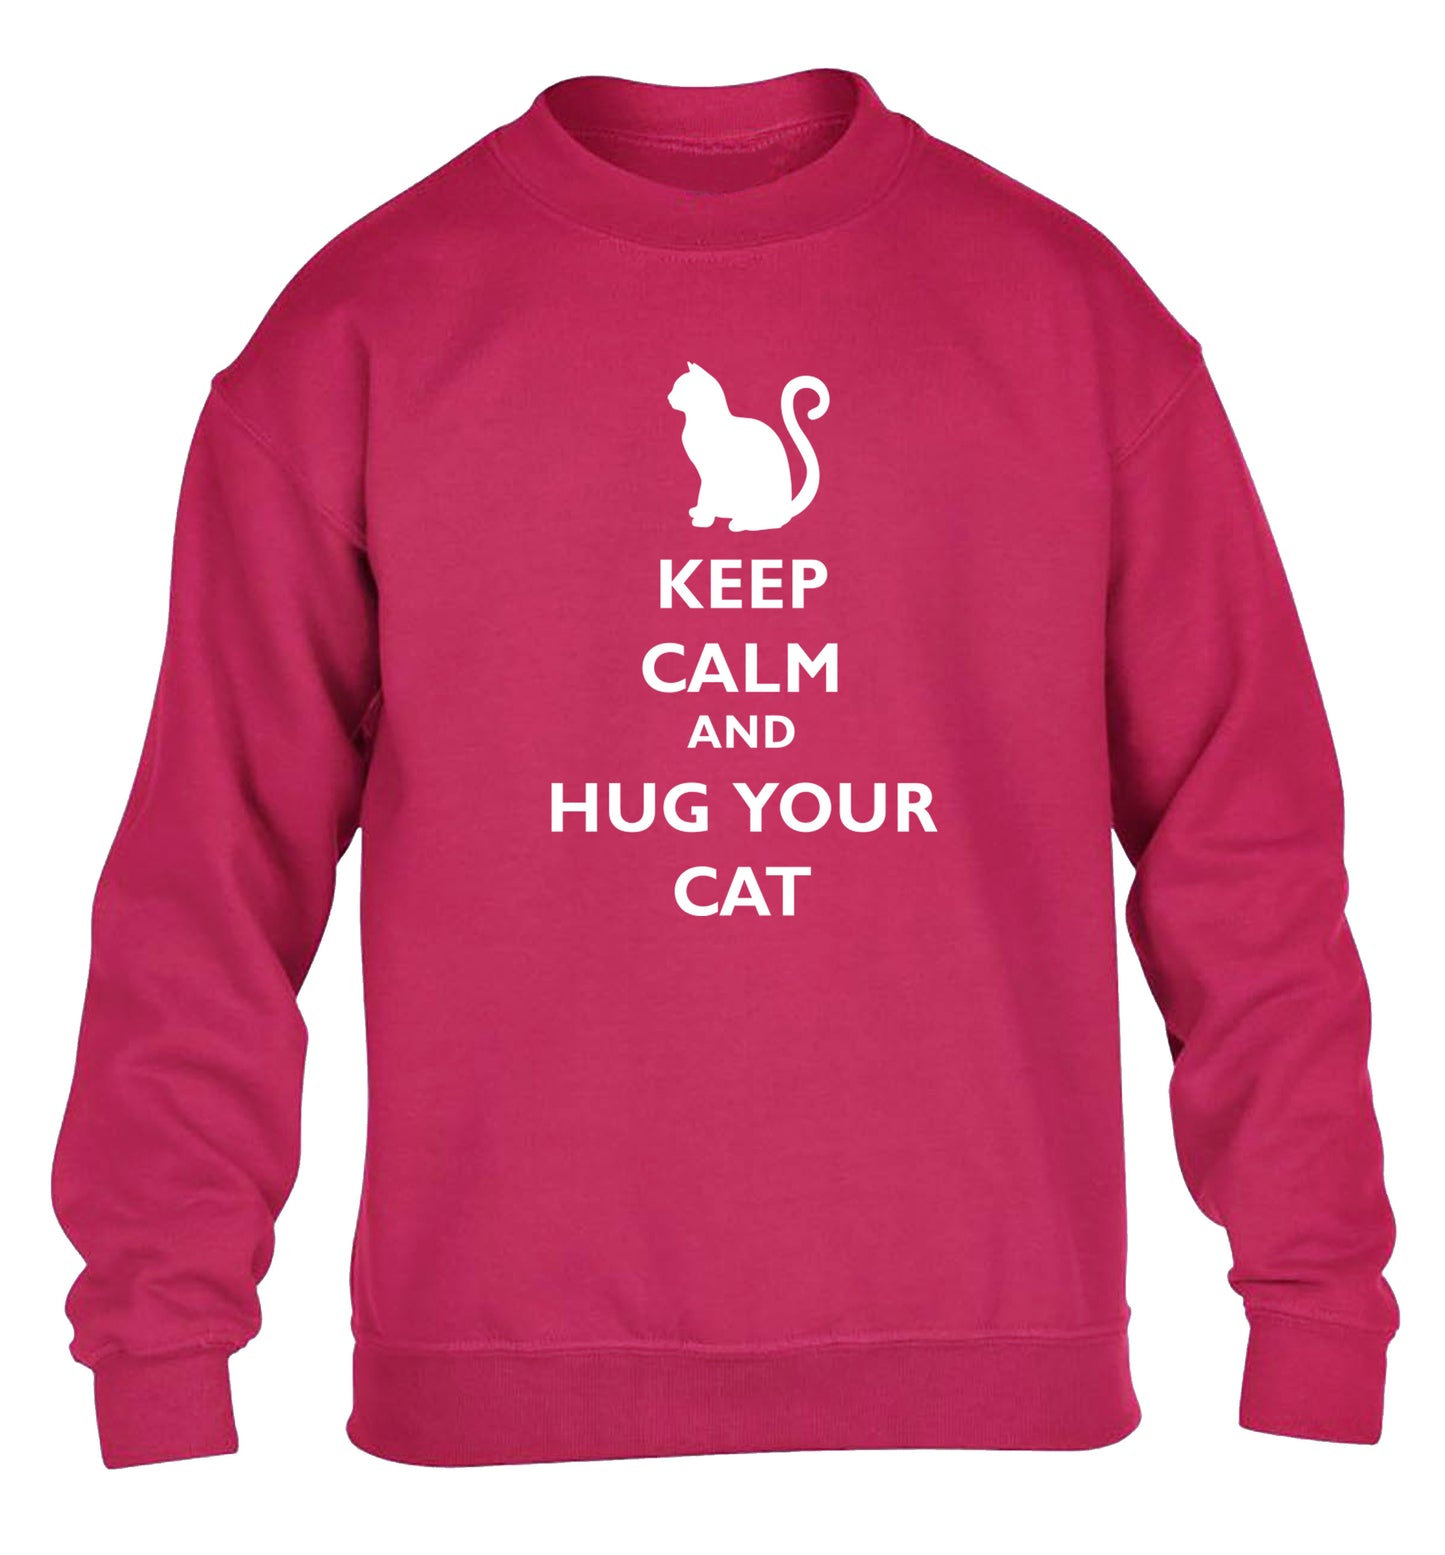 Keep calm and hug your cat children's pink sweater 12-13 Years